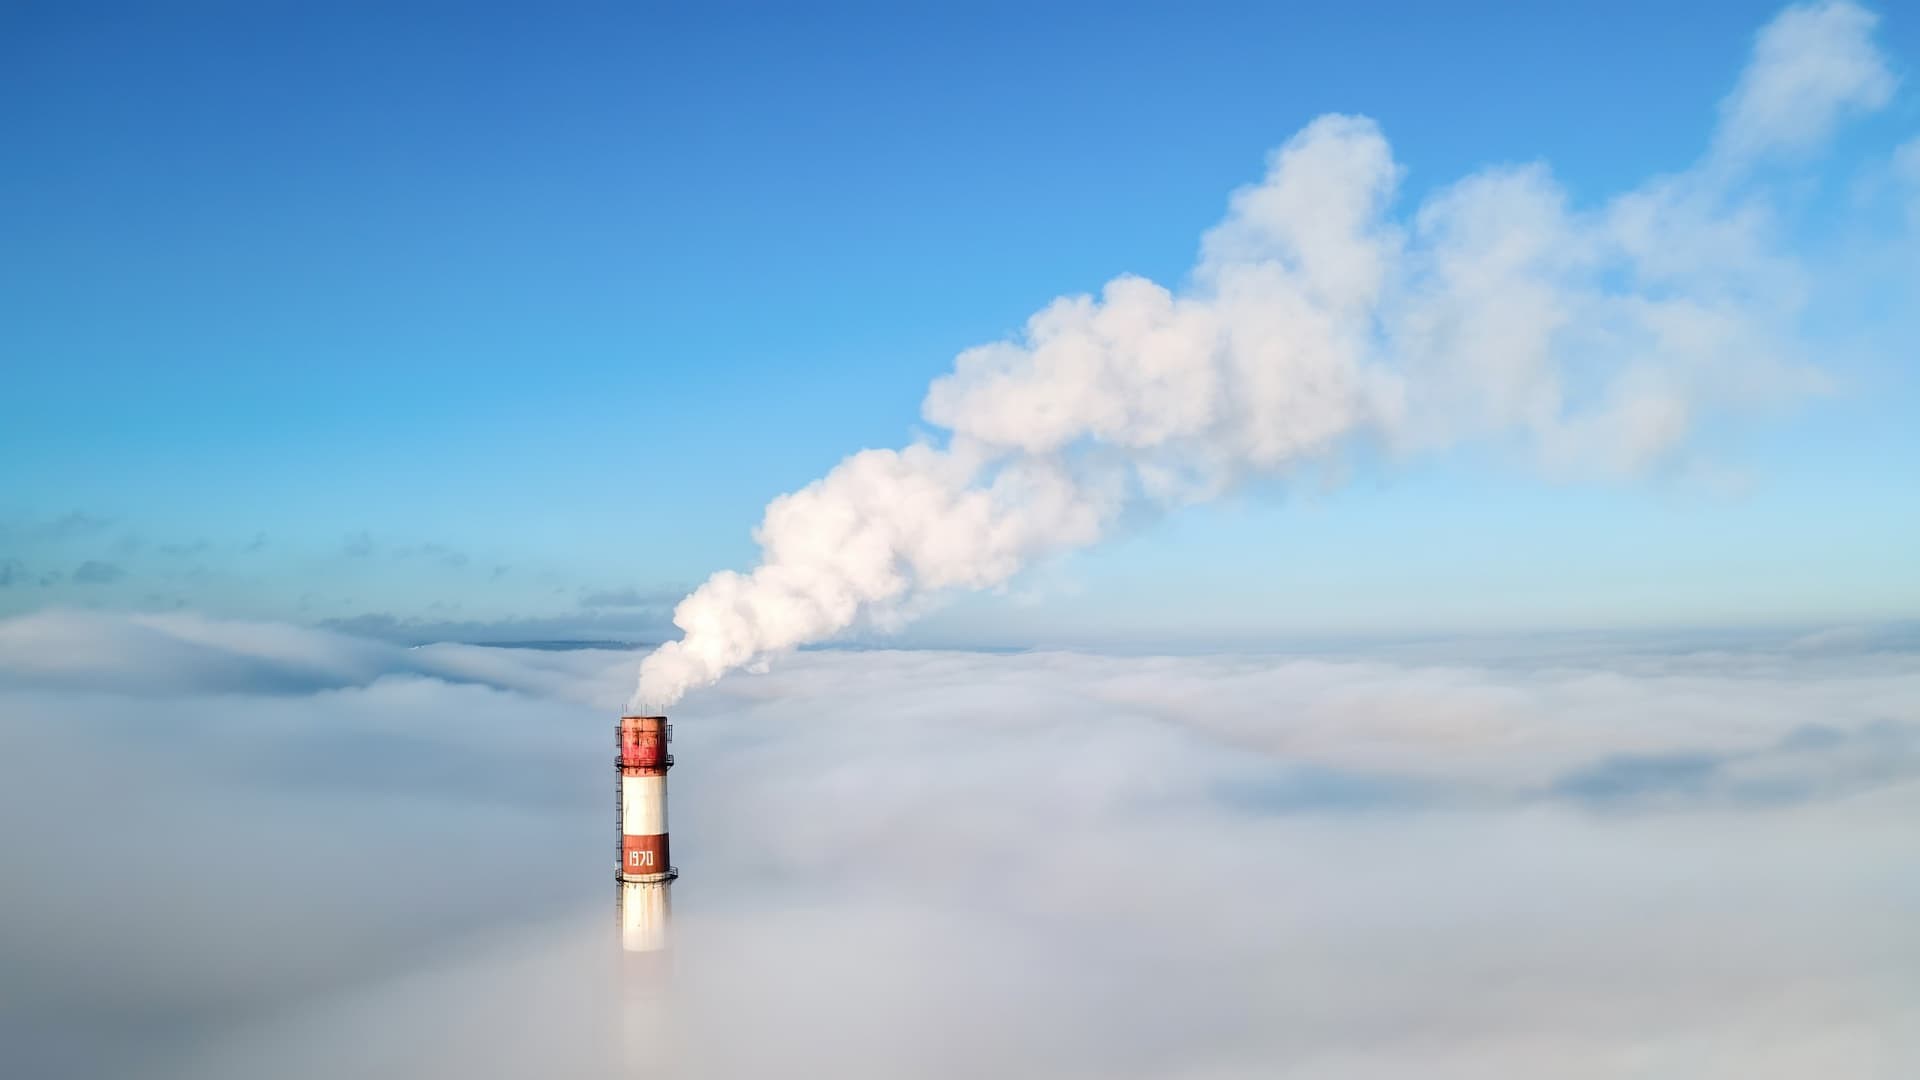 EU Emissions Trading System (EU ETS) is about the carbon dioxide permits